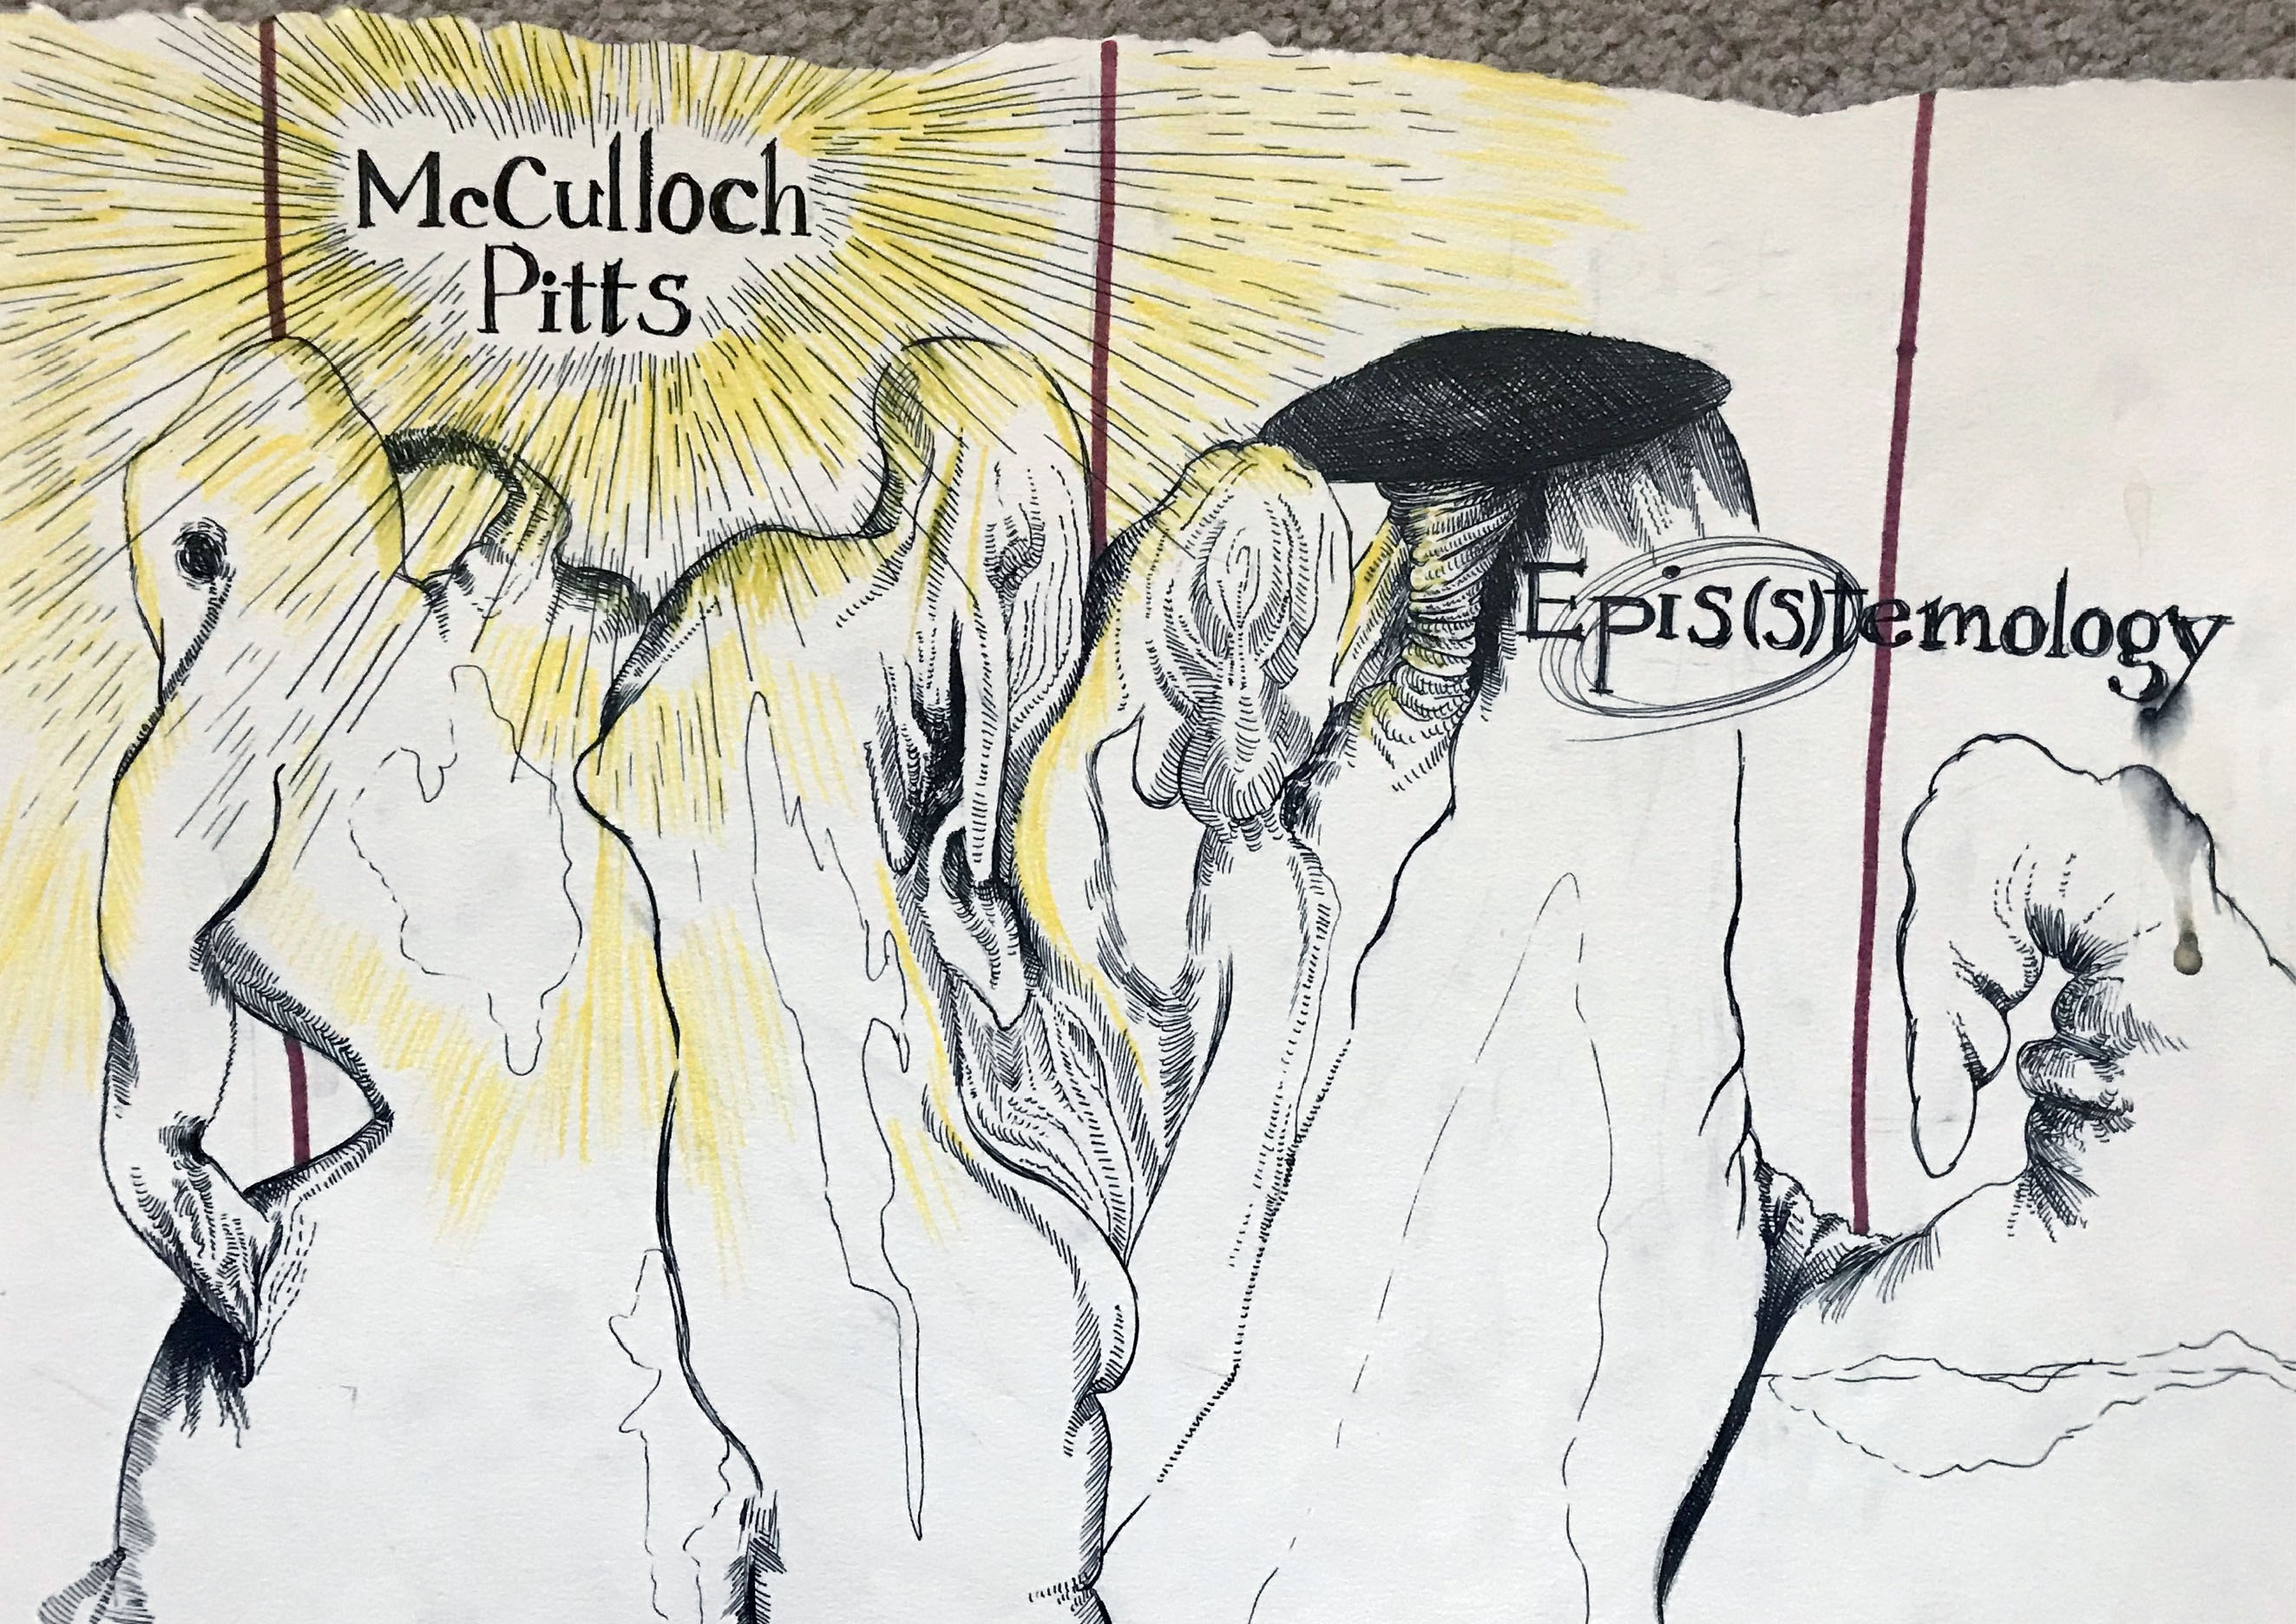 Epis(s)temology (McCulloch-Pitts)